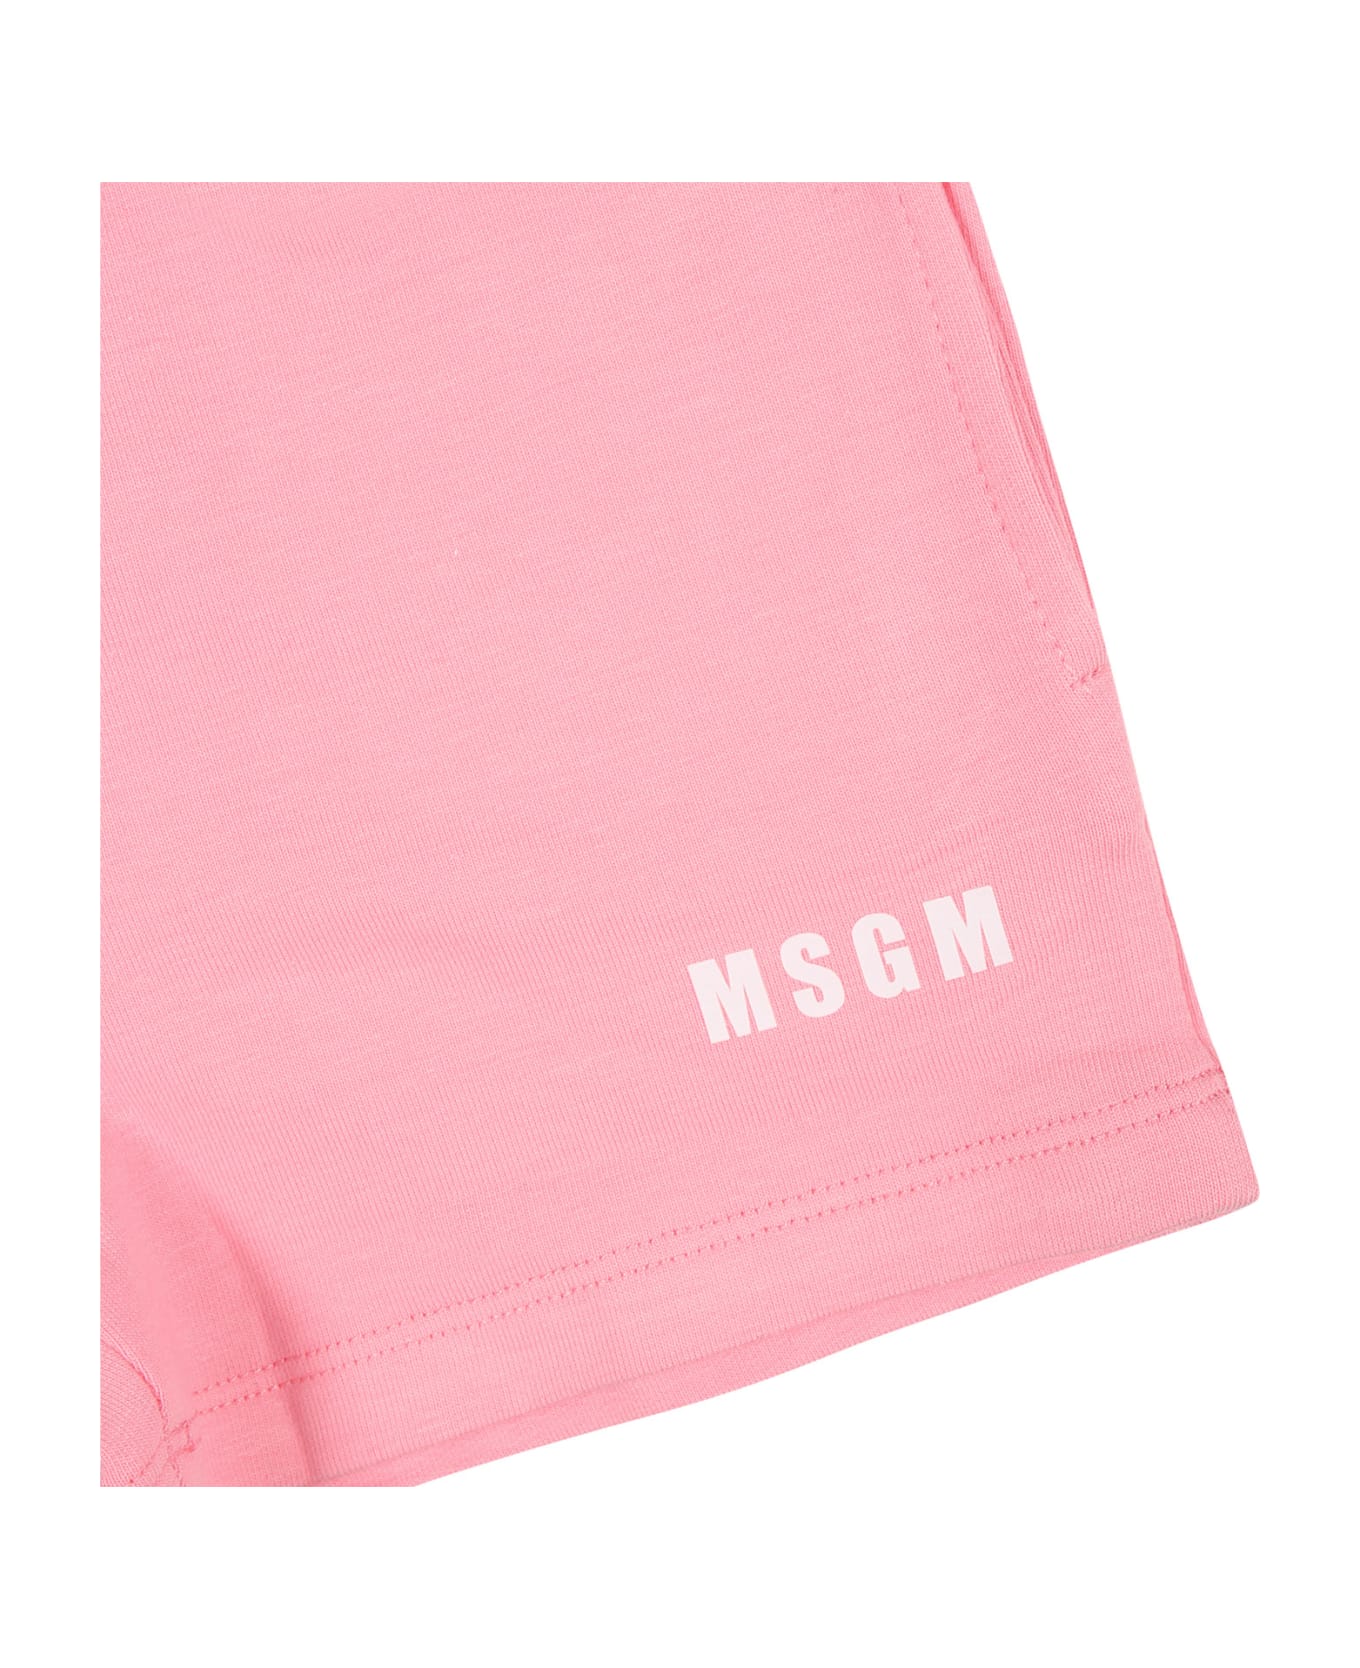 MSGM Pink Set For Baby Girl With Logo - Pink